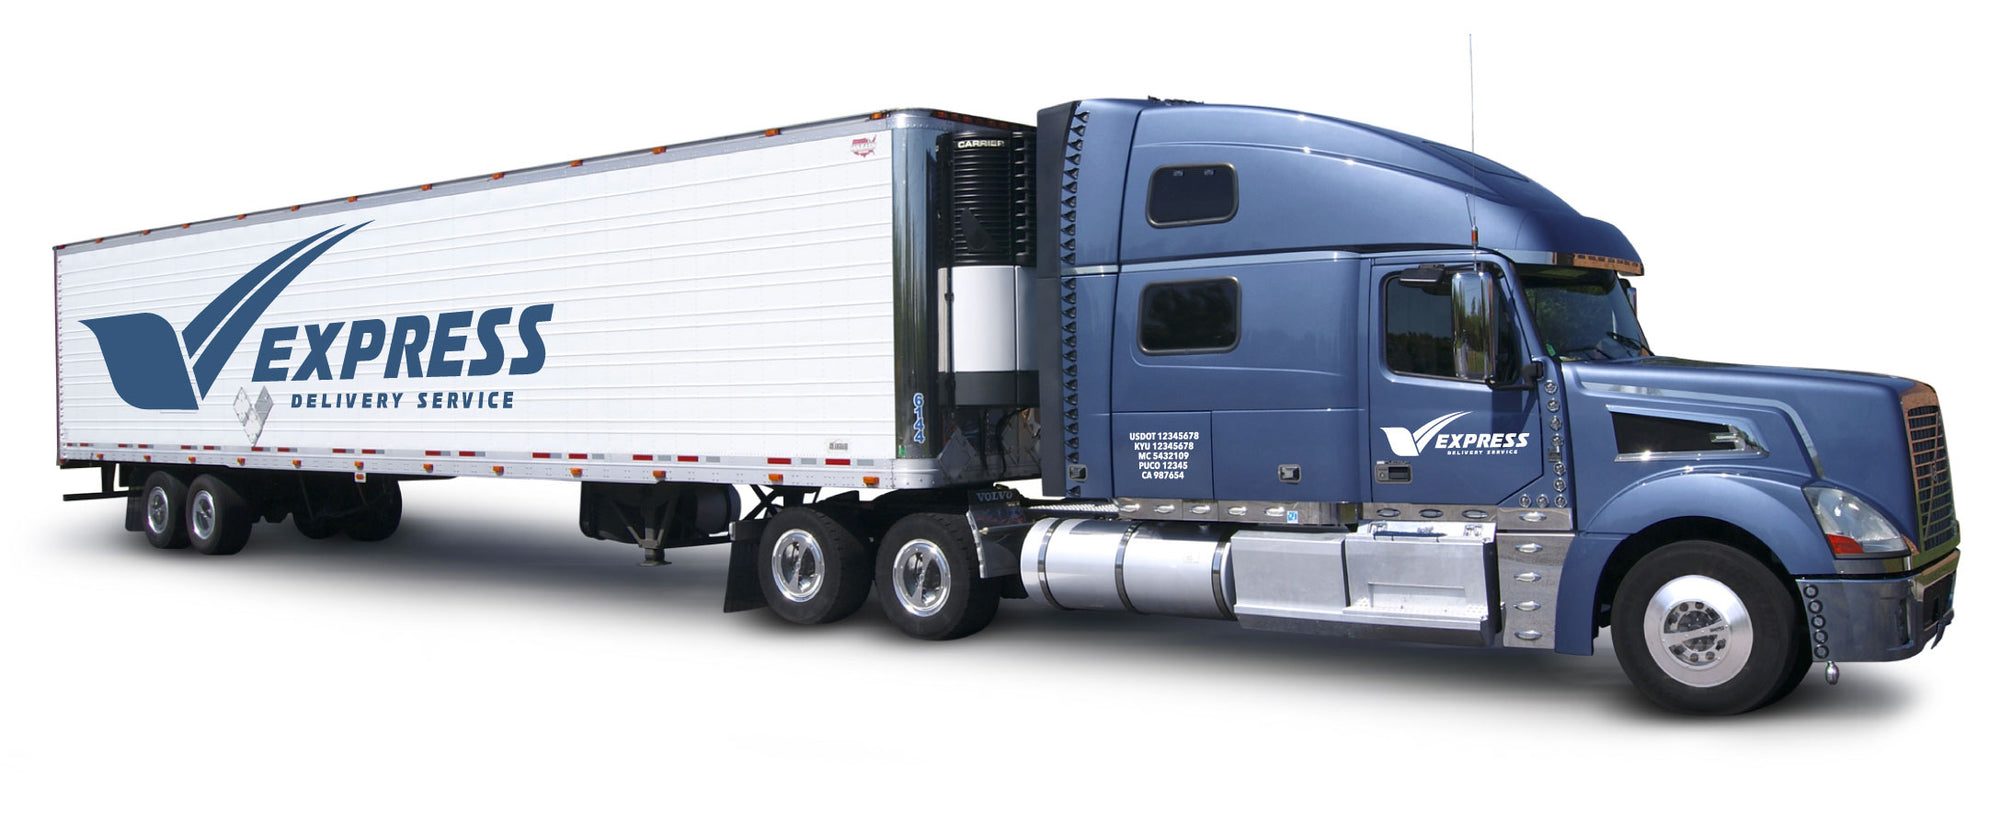 Trailer Graphics for Enclosed Semi Trailers - Company Logos for Trucks